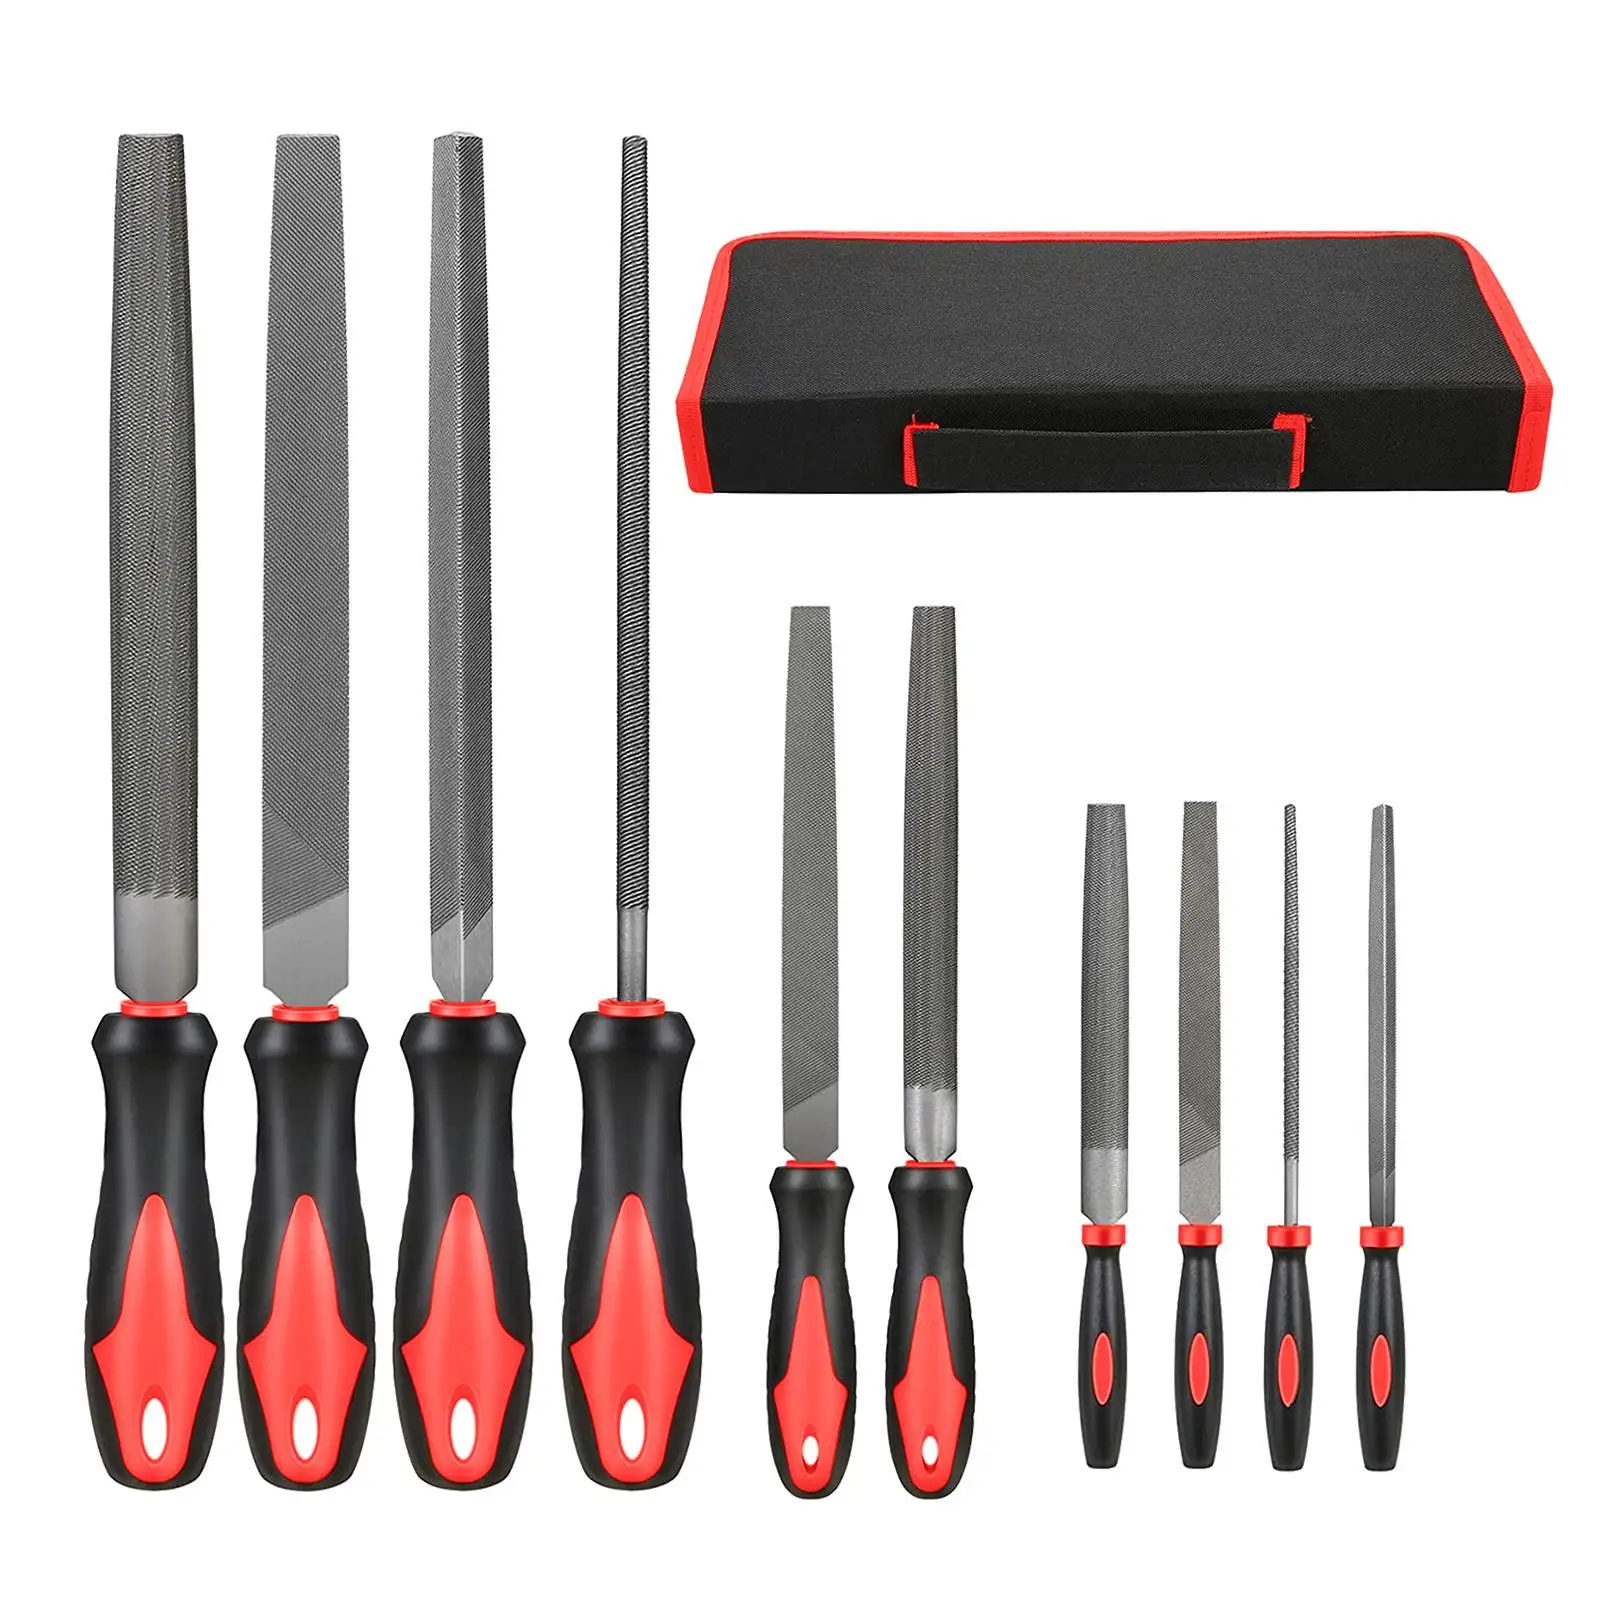 Carbon Steel File Set Precision File Set Woodworking Tools Drop Forging File Set for Carpentry Jewelry Wood DIY Handmade Model